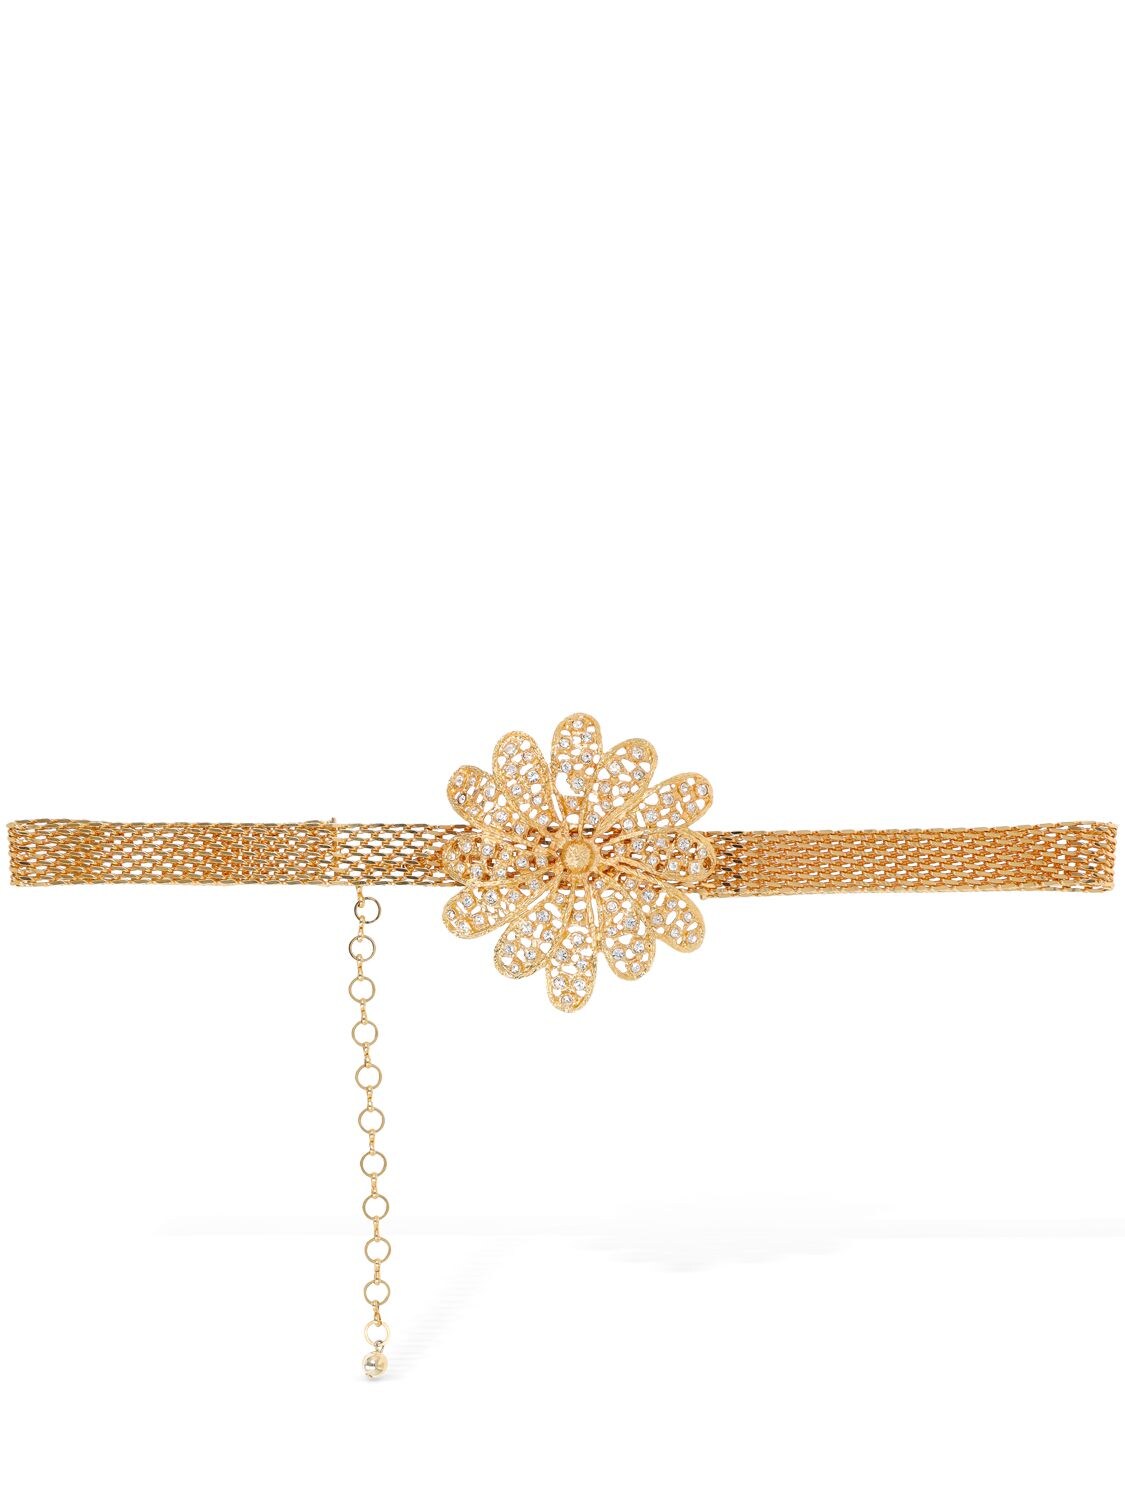 Alessandra Rich Chain Belt With Daisy Embellishment In Gold,crystal